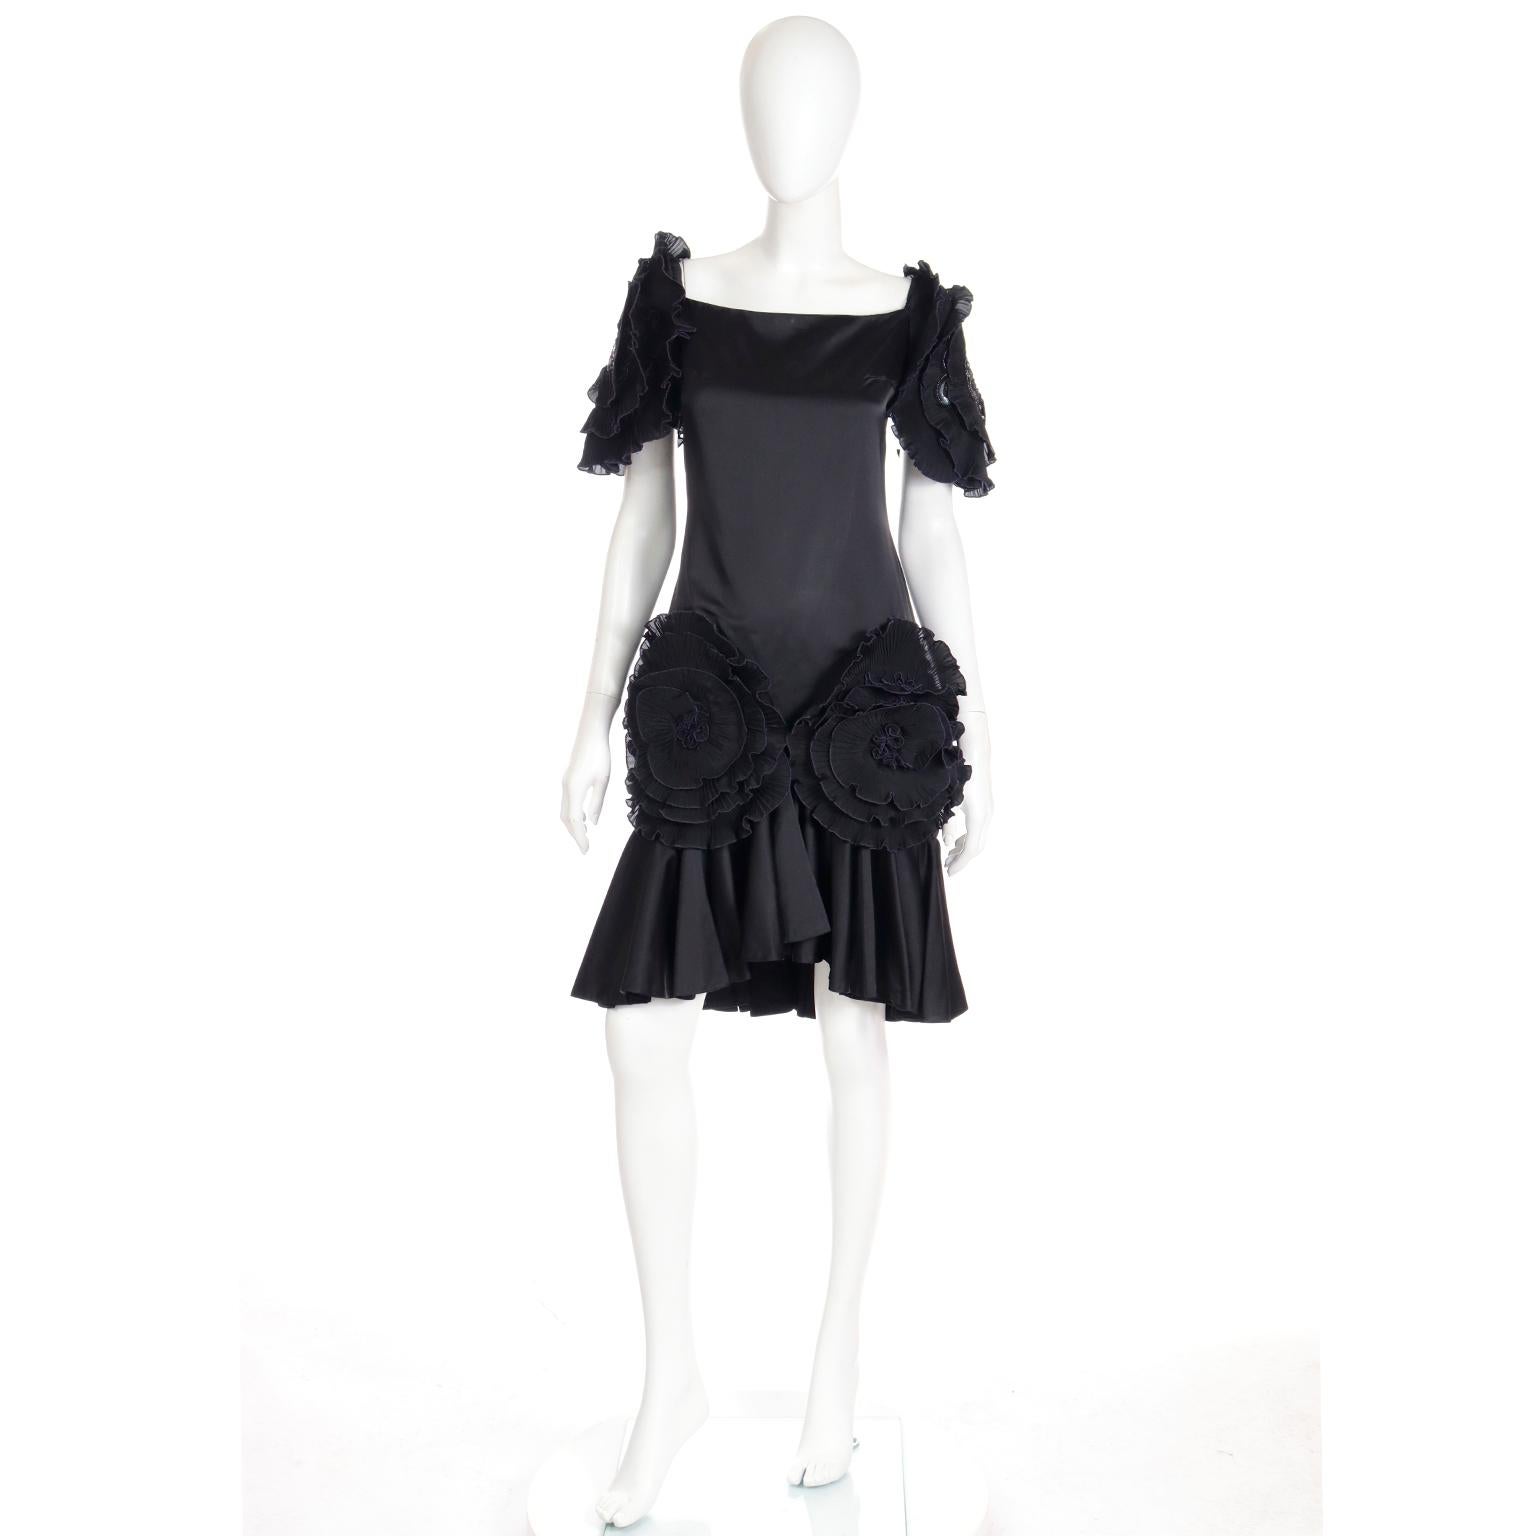 This is an incredible vintage 1980's Zandra Rhodes black satin evening dress with beautiful oversized rosettes at the sleeves and on the skirt. These rosettes are pleated and the ones on the gorgeous sleeves have beads and sequins. Made of 51% silk